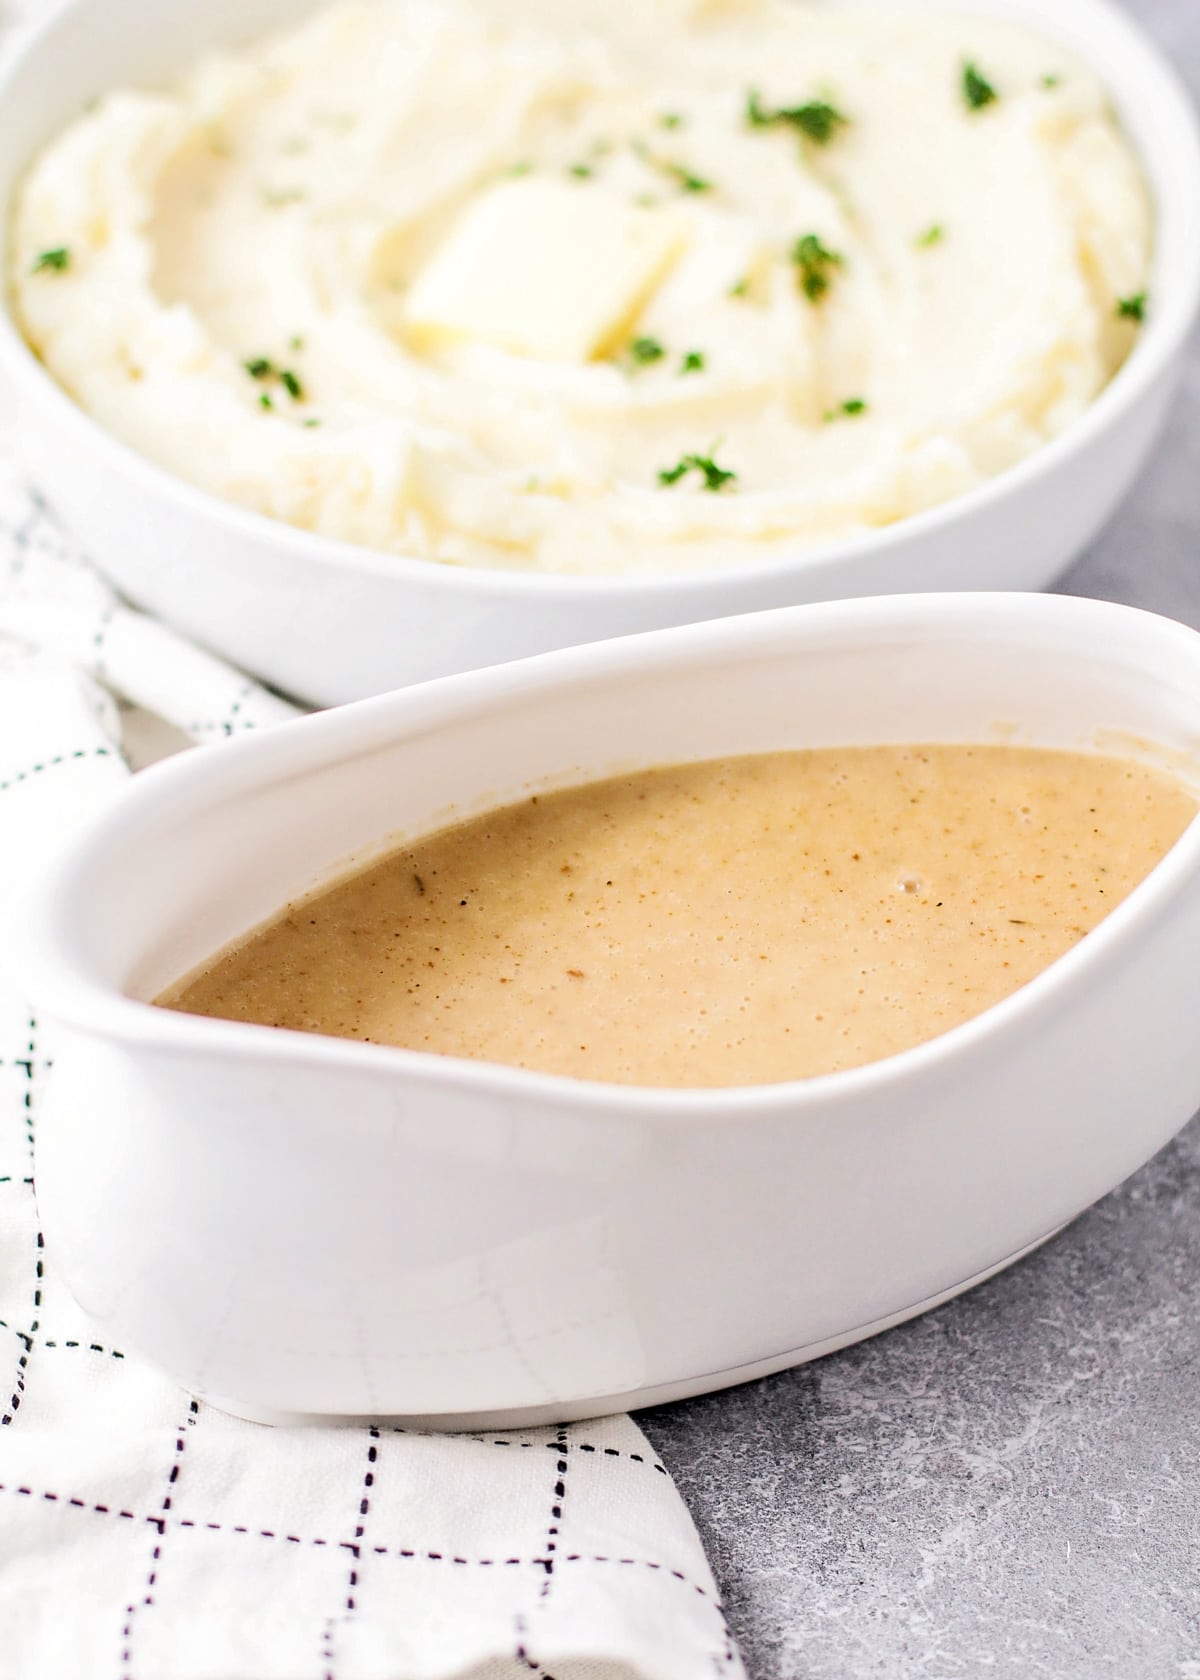 Mashed potato gravy served in a bowl next to mashed potatoes.